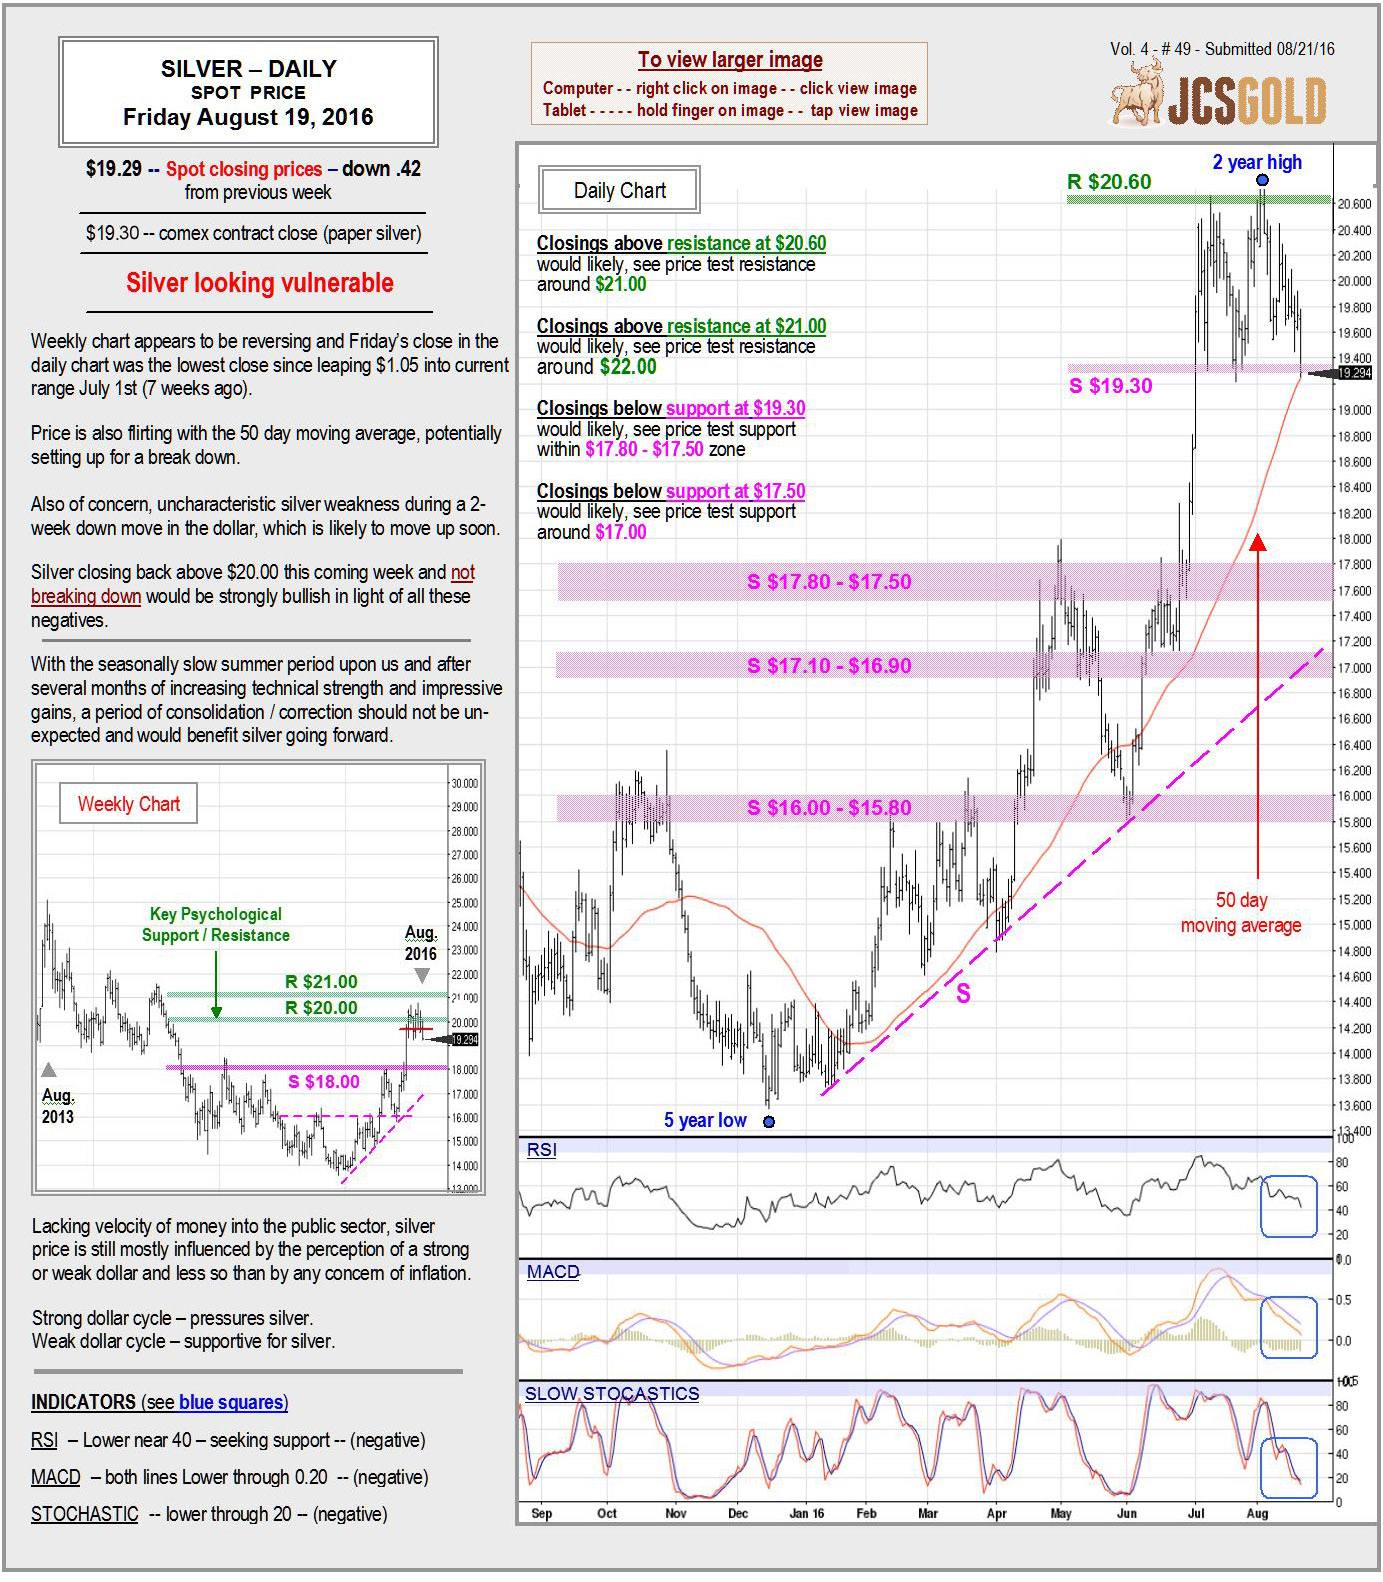 August 19, 2016 chart & commentary